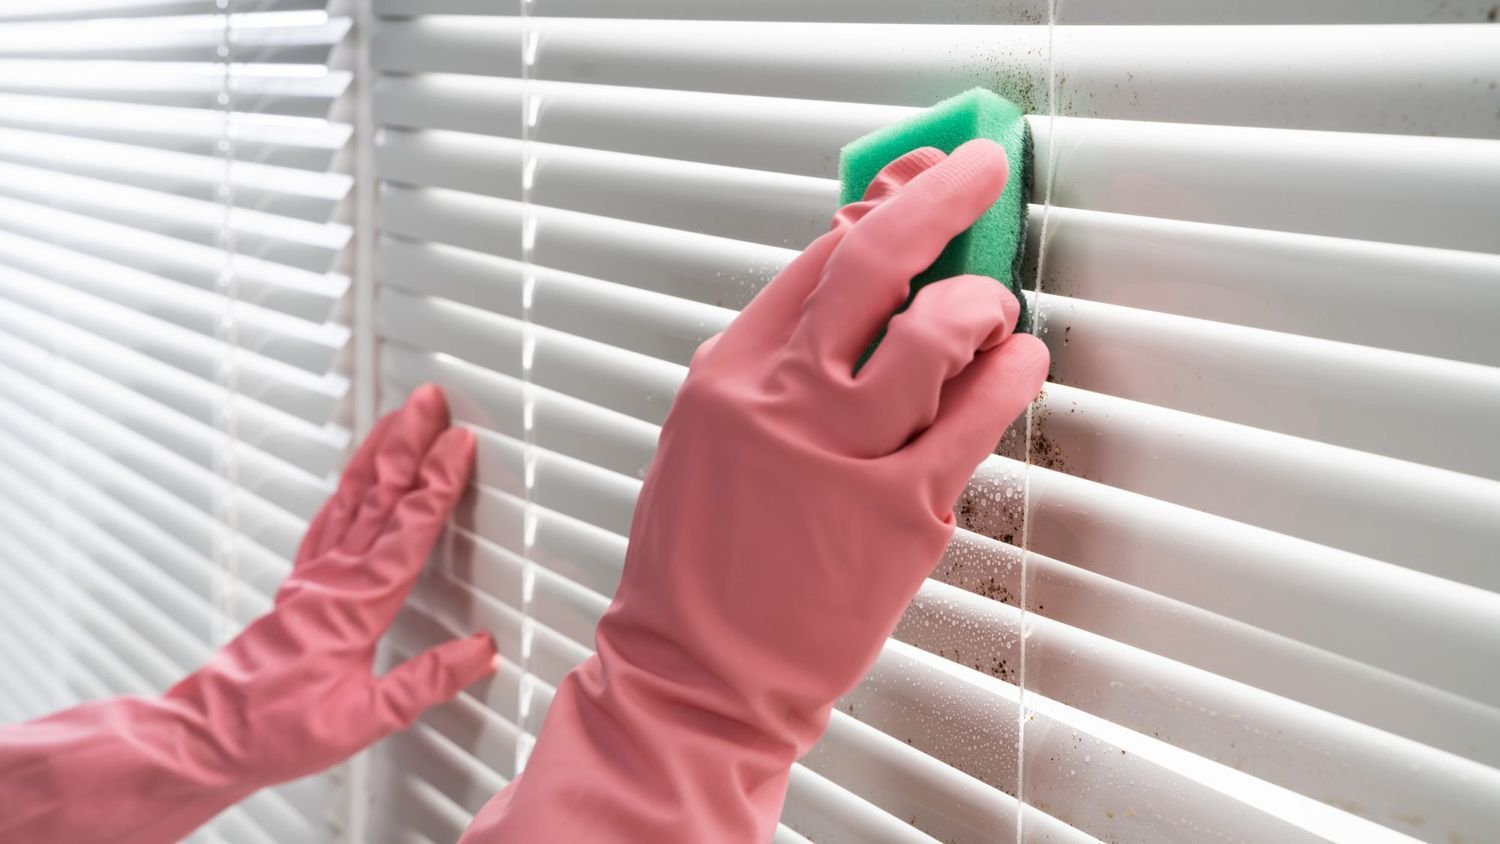 How to easily clean blinds without taking them down - TODAY